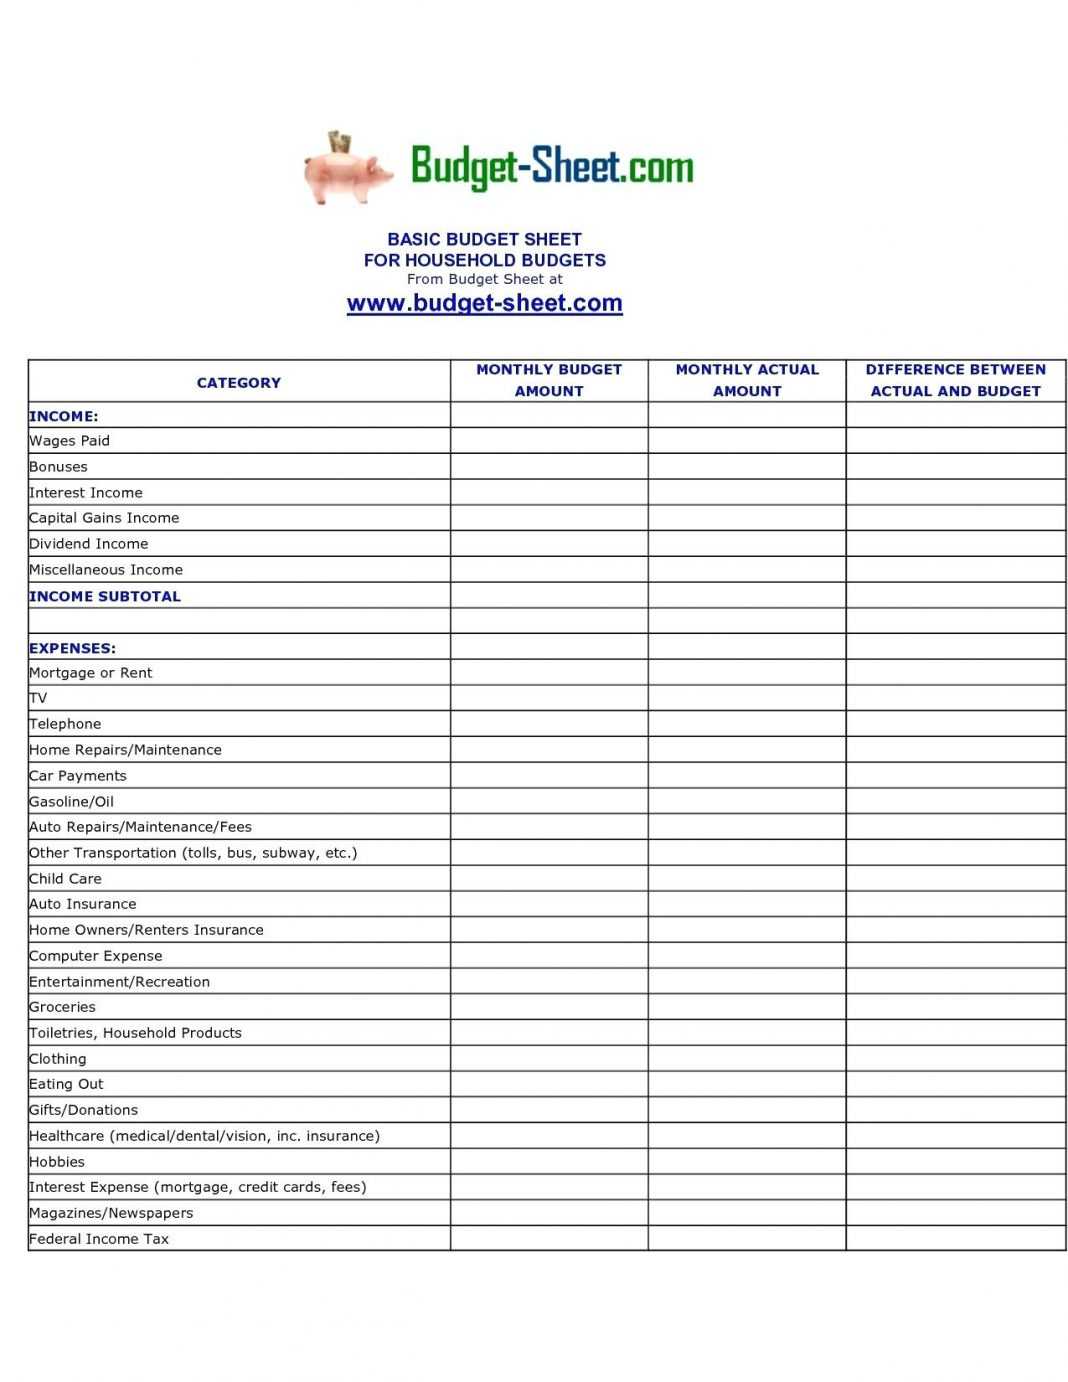 Family Budget Google Doc Template Docs Financial Spreadsheet With Usmc Meal Card Template